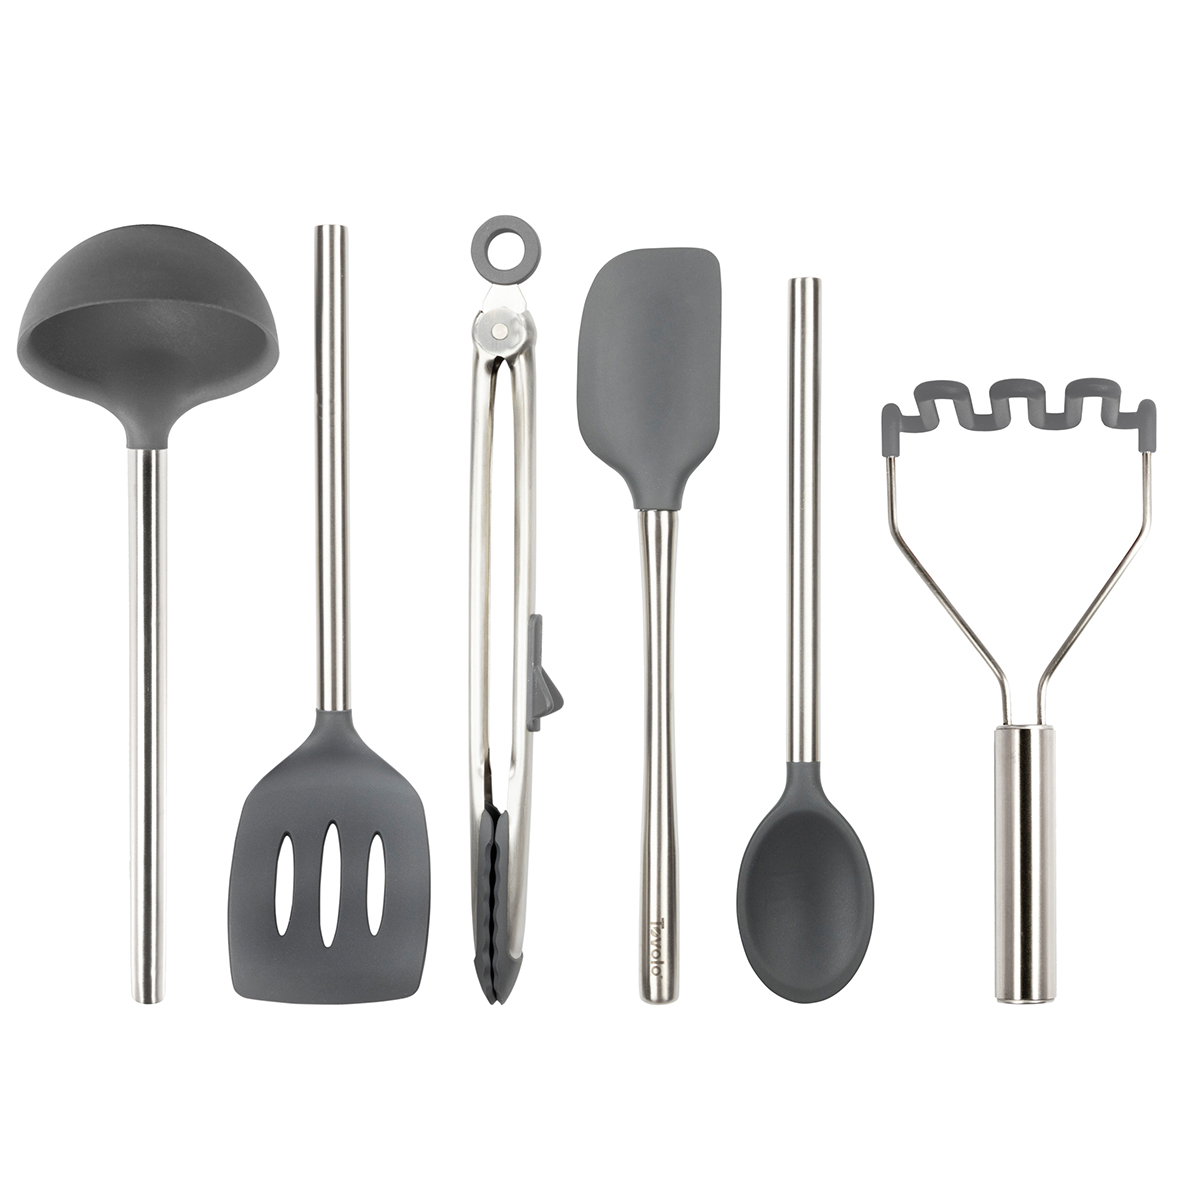 https://www.containerstore.com/catalogimages/514577/10098747_Silicone_Utensil_Set_Charco.jpg